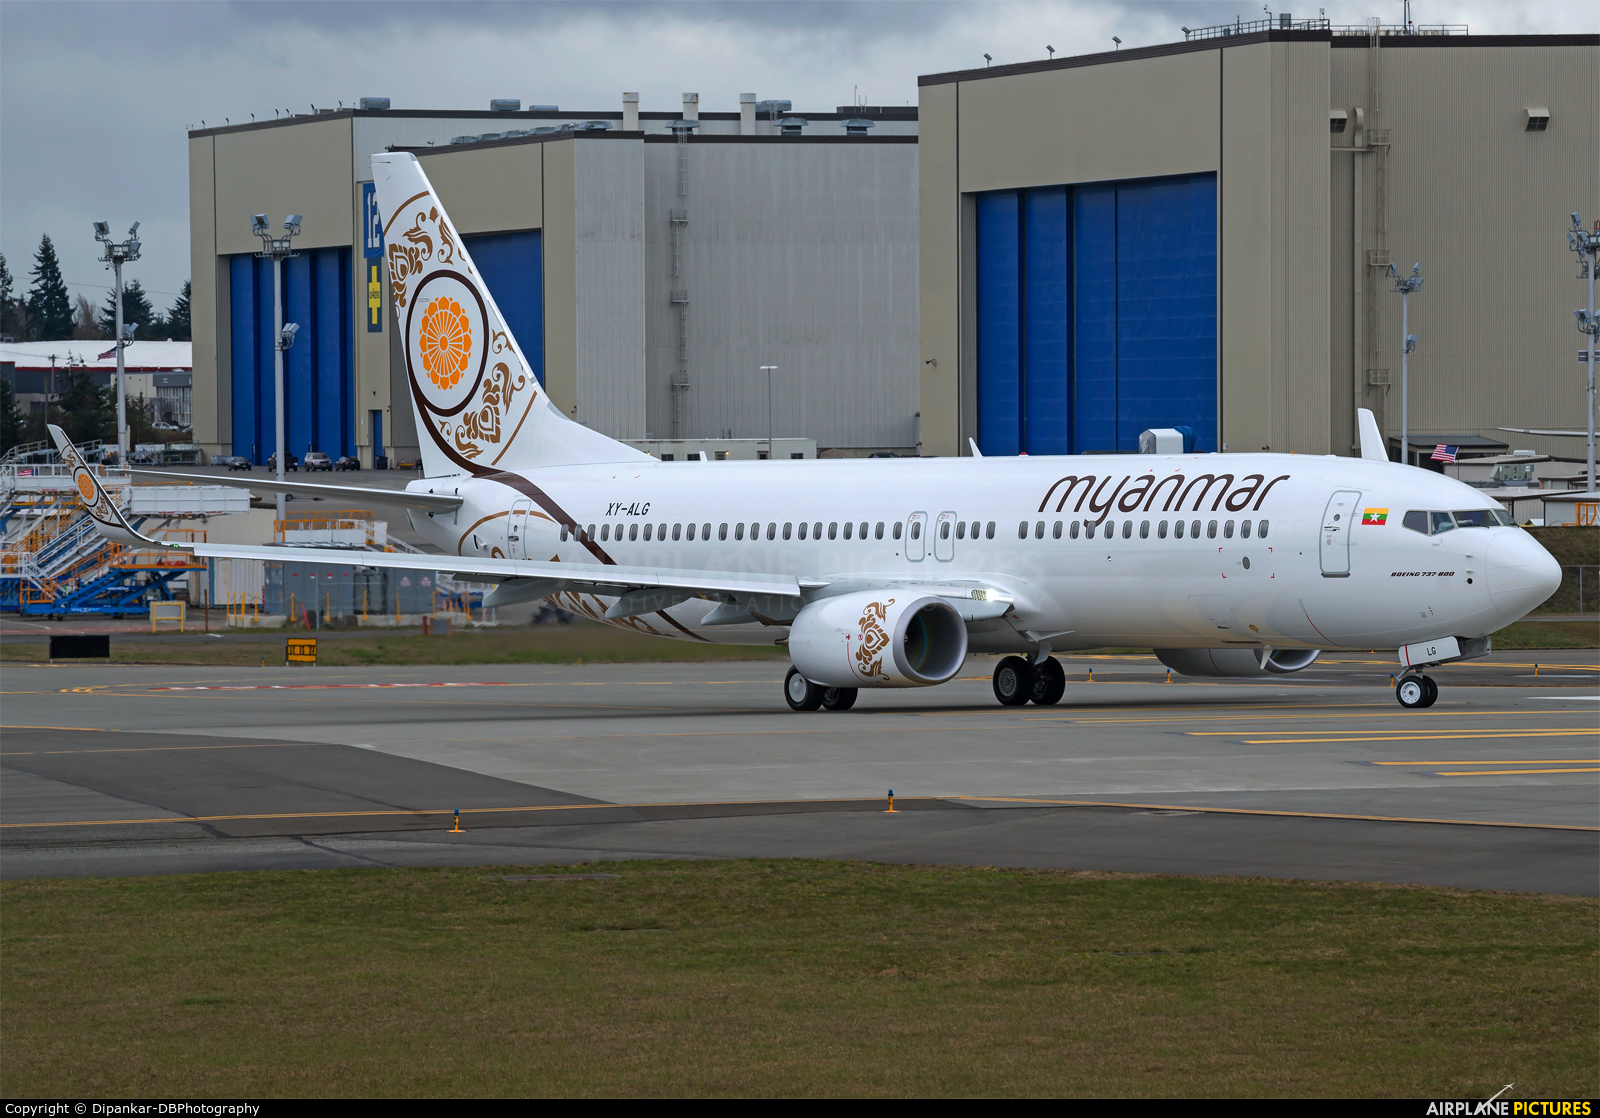 Myanma Airways XY-ALG aircraft at Everett - Snohomish County / Paine Field